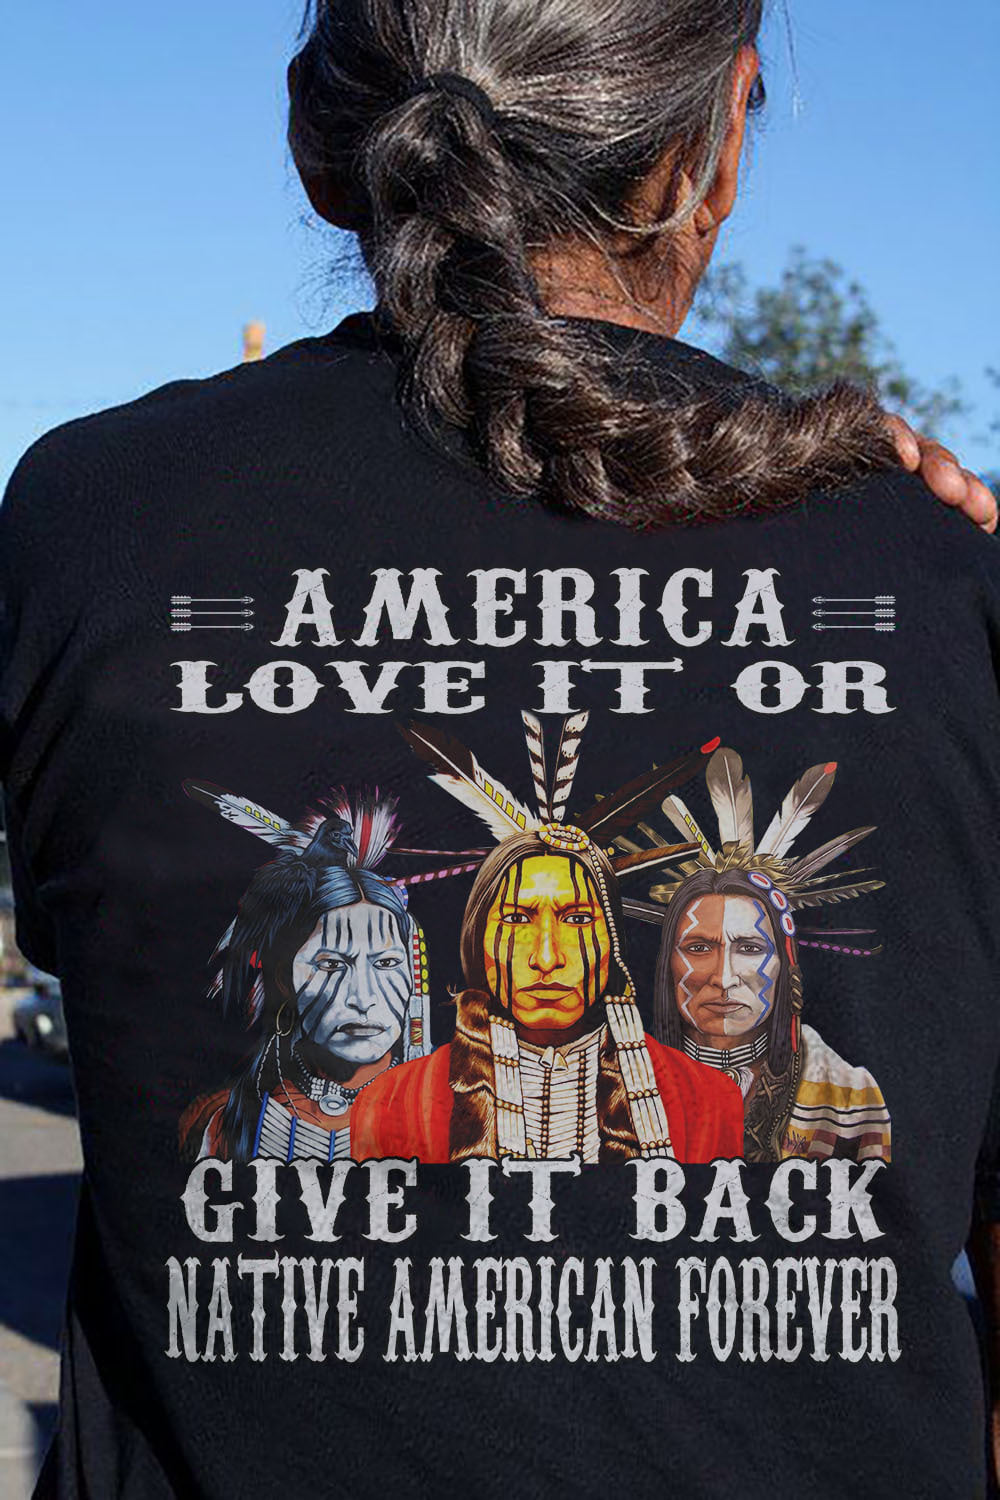 America love it or give it back native american forever